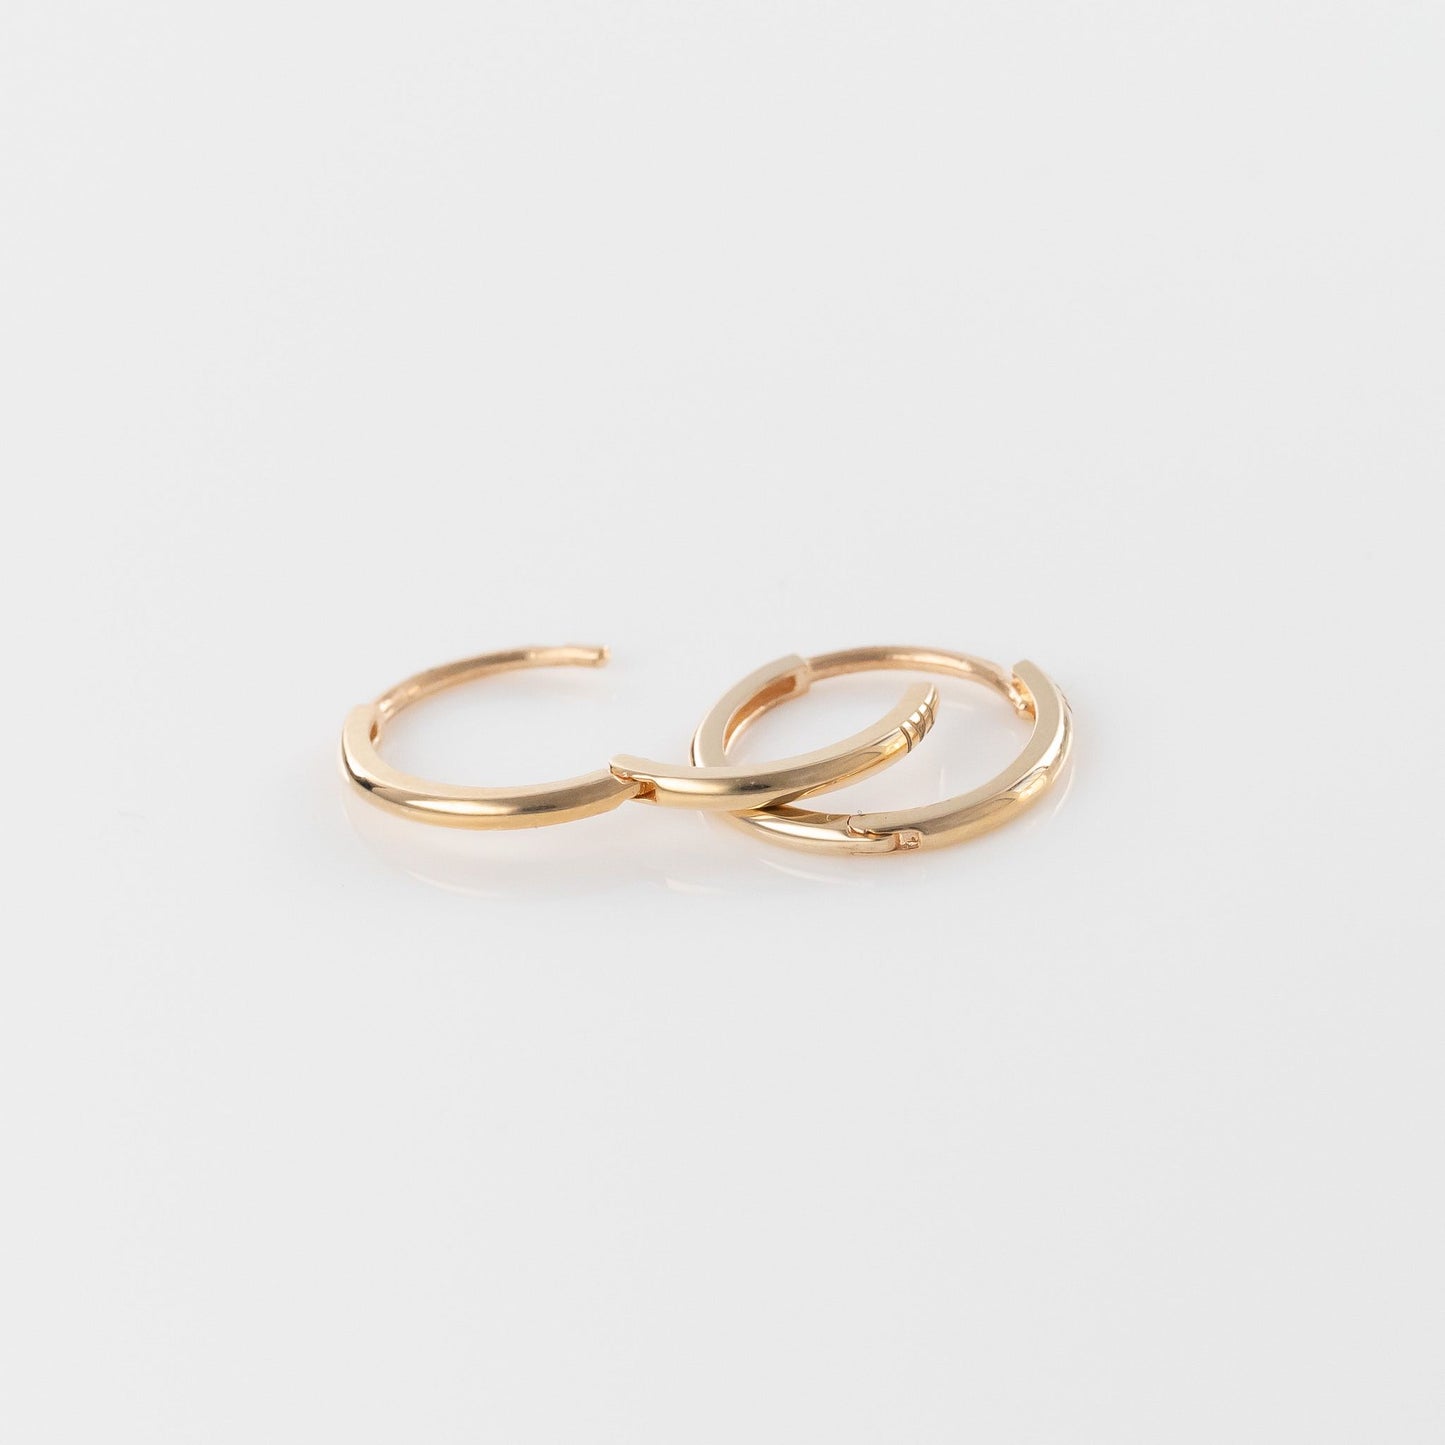 Load image into Gallery viewer, 14k Yellow Gold 12mm Huggies
